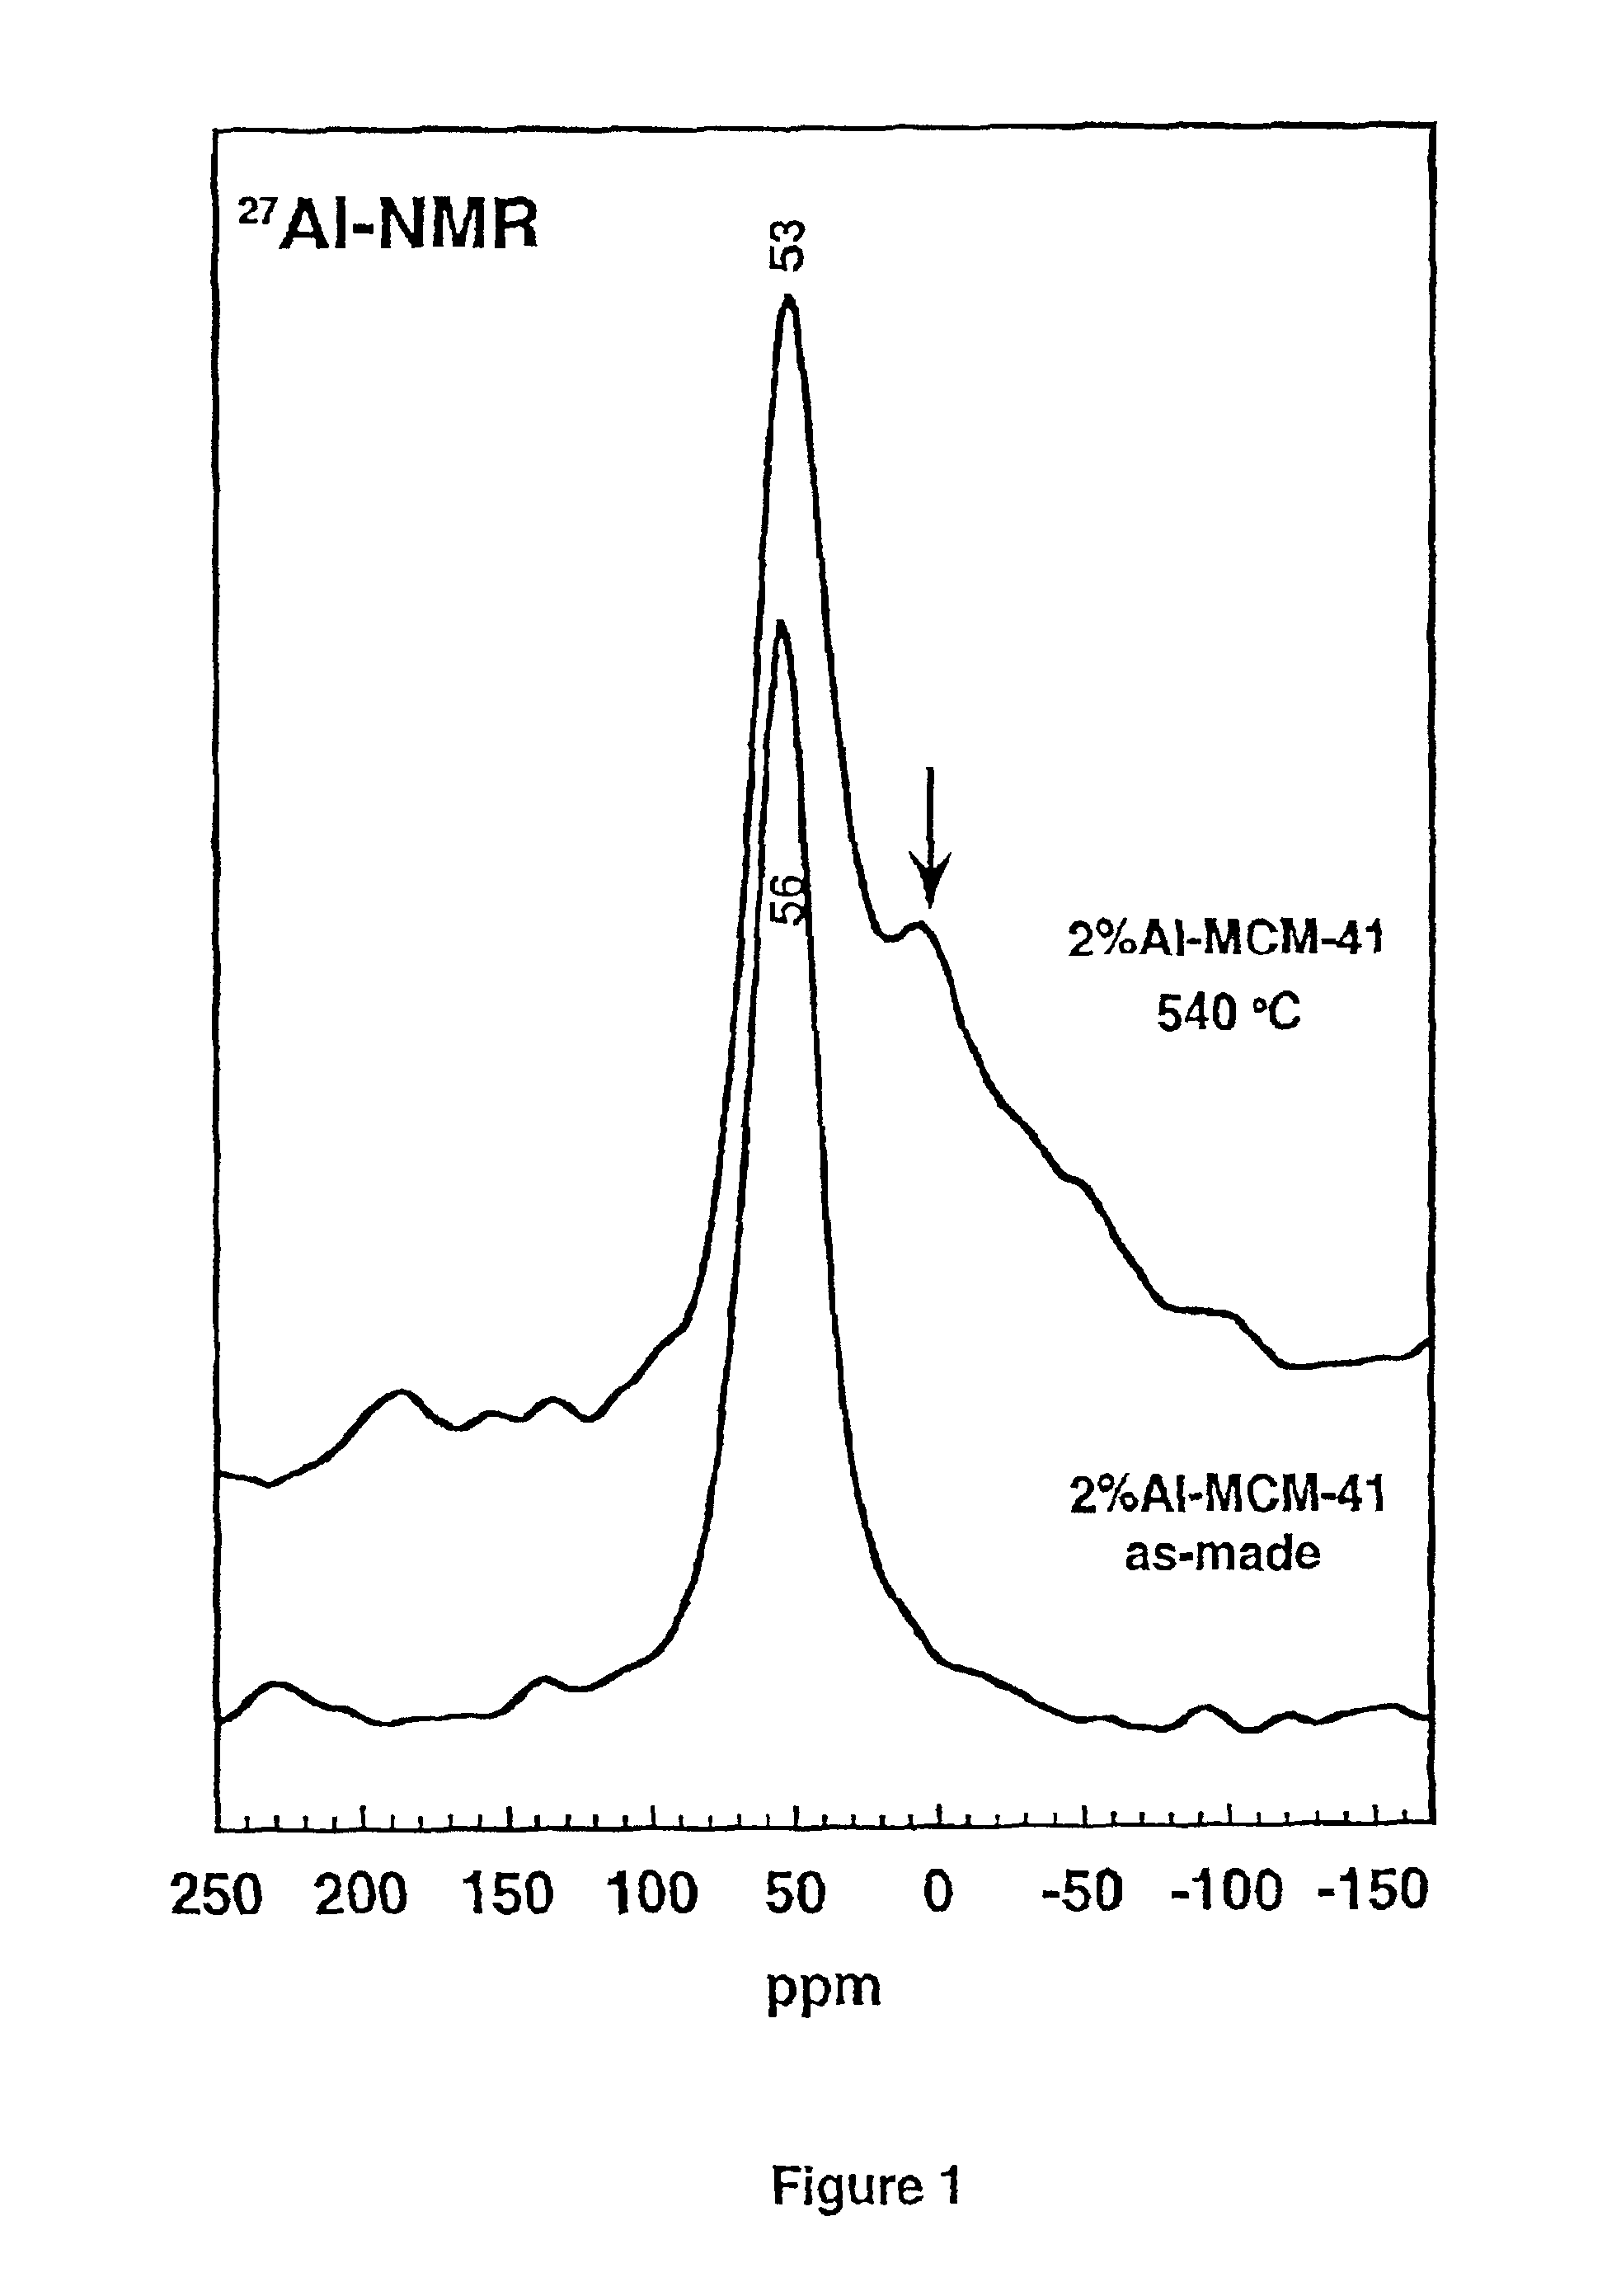 Ultrastable porous aluminosilicate structures and compositions derived therefrom